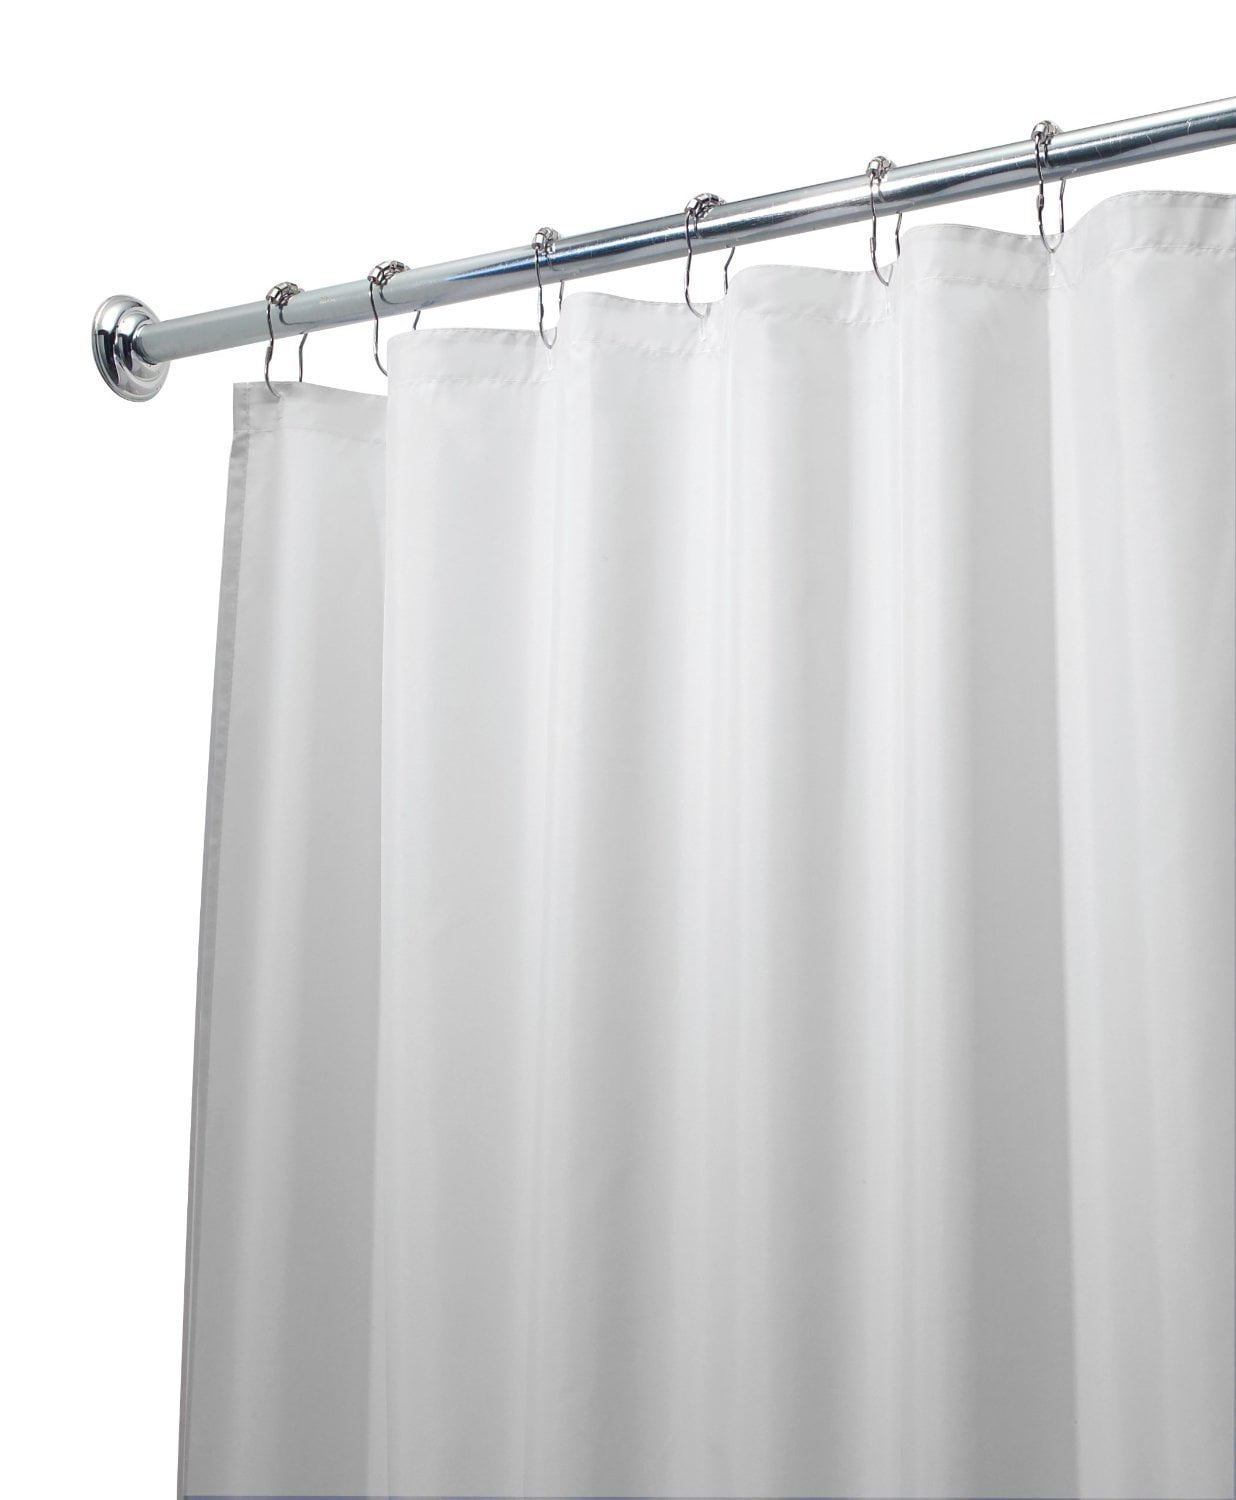 HEAVY DUTY MILDEW FREE VINYL WATERPROOF SHOWER CURTAIN LINER WITH MAGNETS NEW